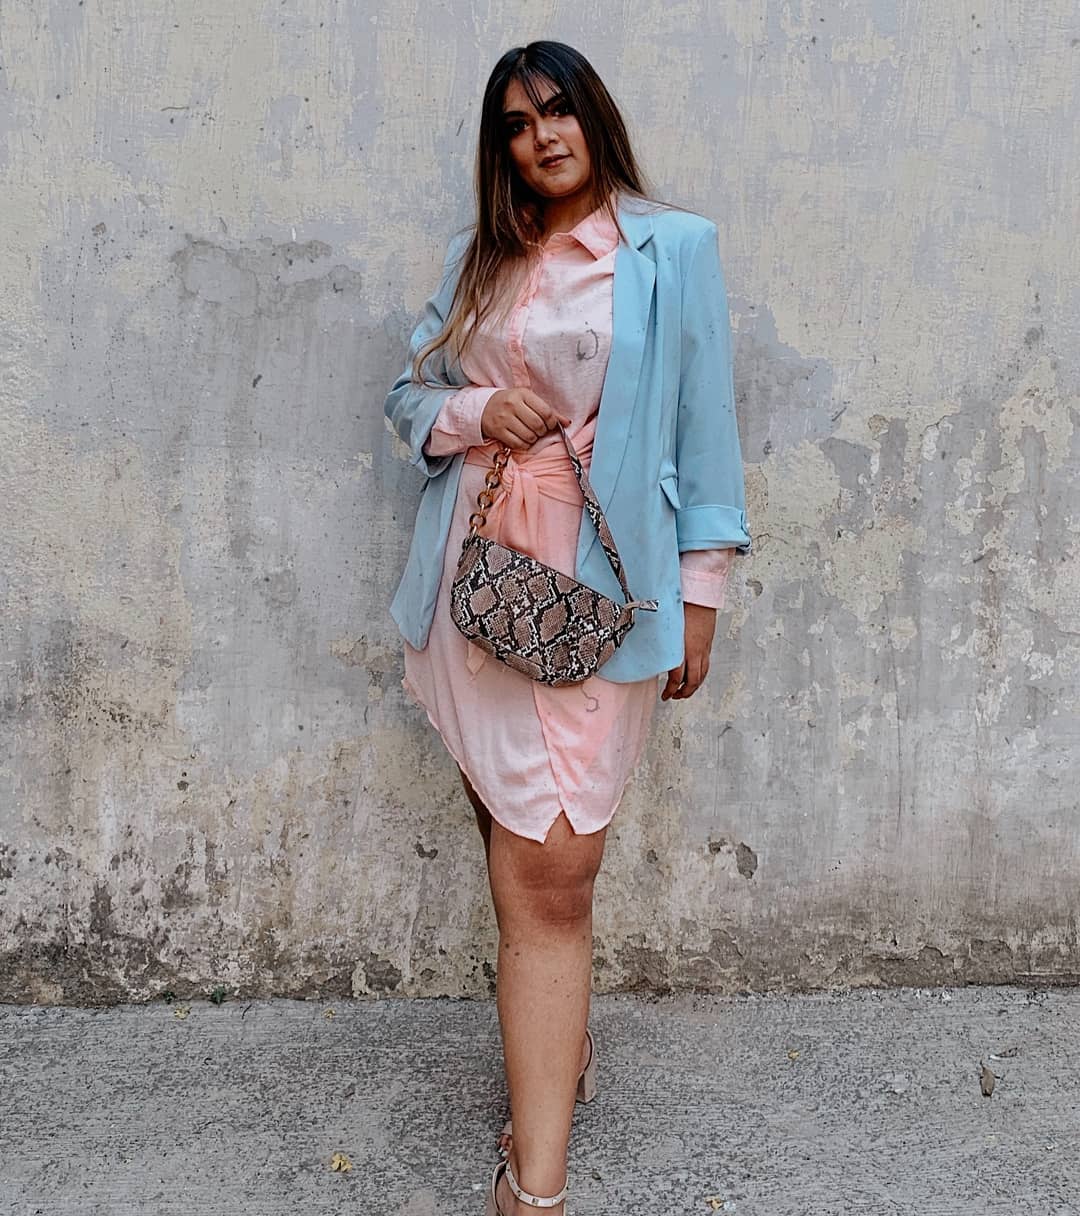 MYNTRA - Lazy Sunday brunches done right with a play of layering. 📸 @runaway.to.reality
Look up product code: 10730116 (dress) / 11844282 (blazer) / 11127566 (similar handbag)
For more on-point looks,...